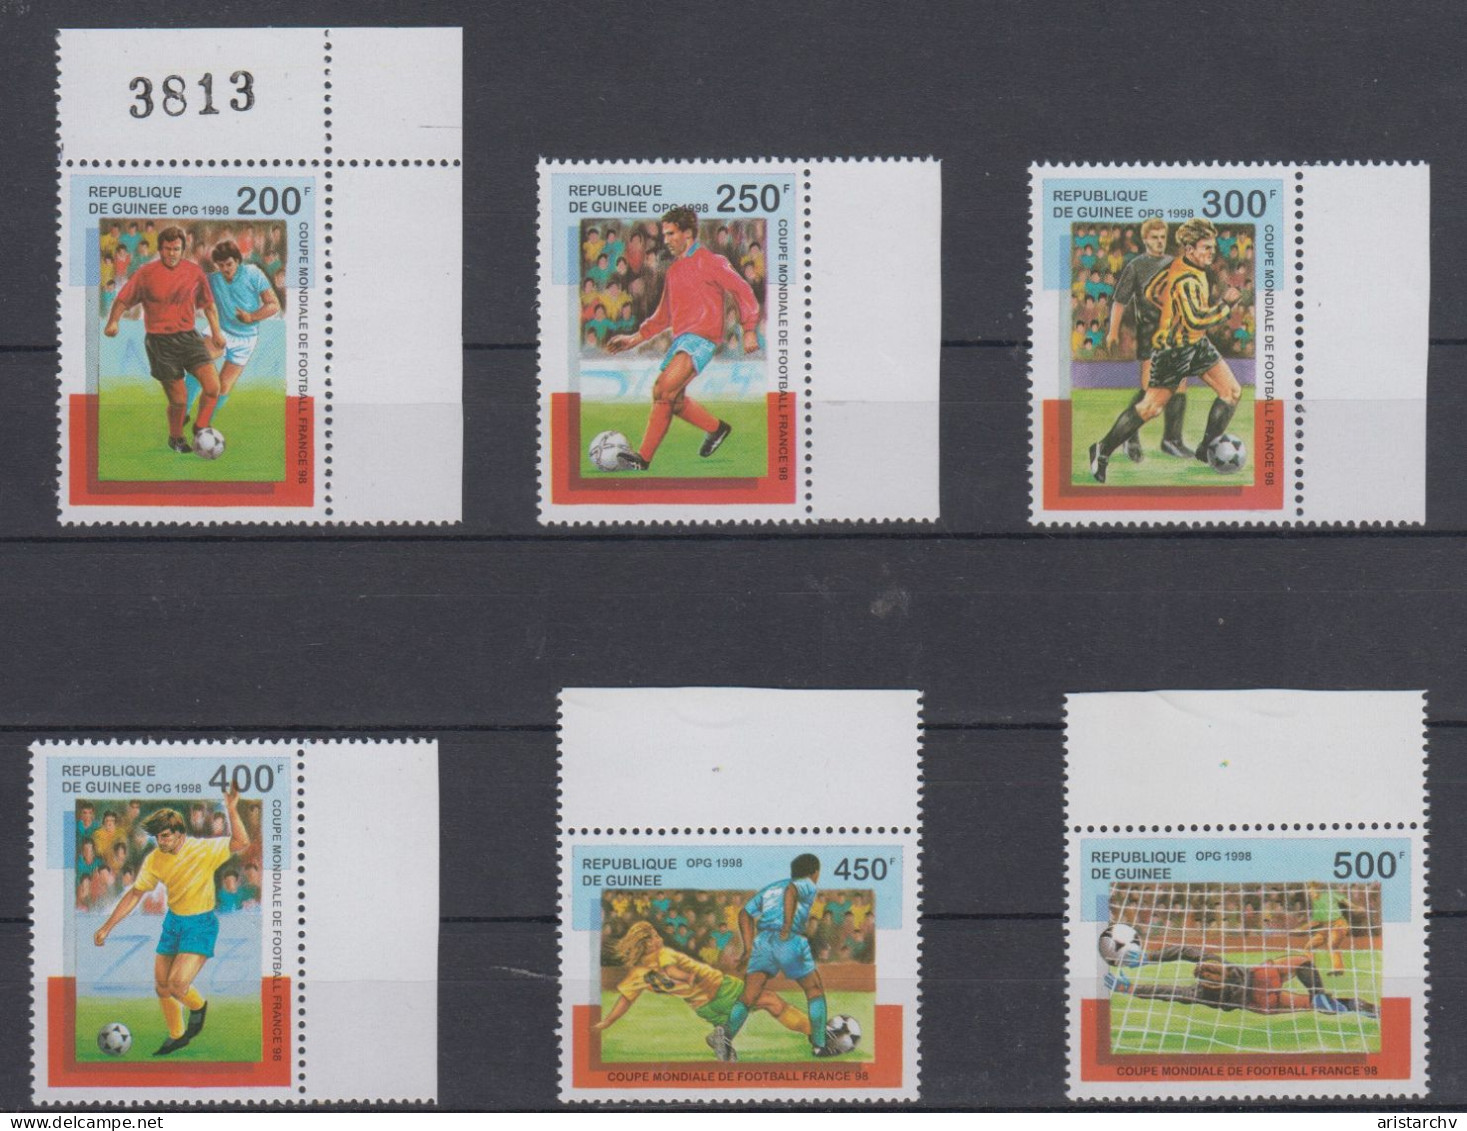 GUINEE 1998 FOOTBALL WORLD CUP S/SHEET AND 6 STAMPS - 1998 – Frankreich